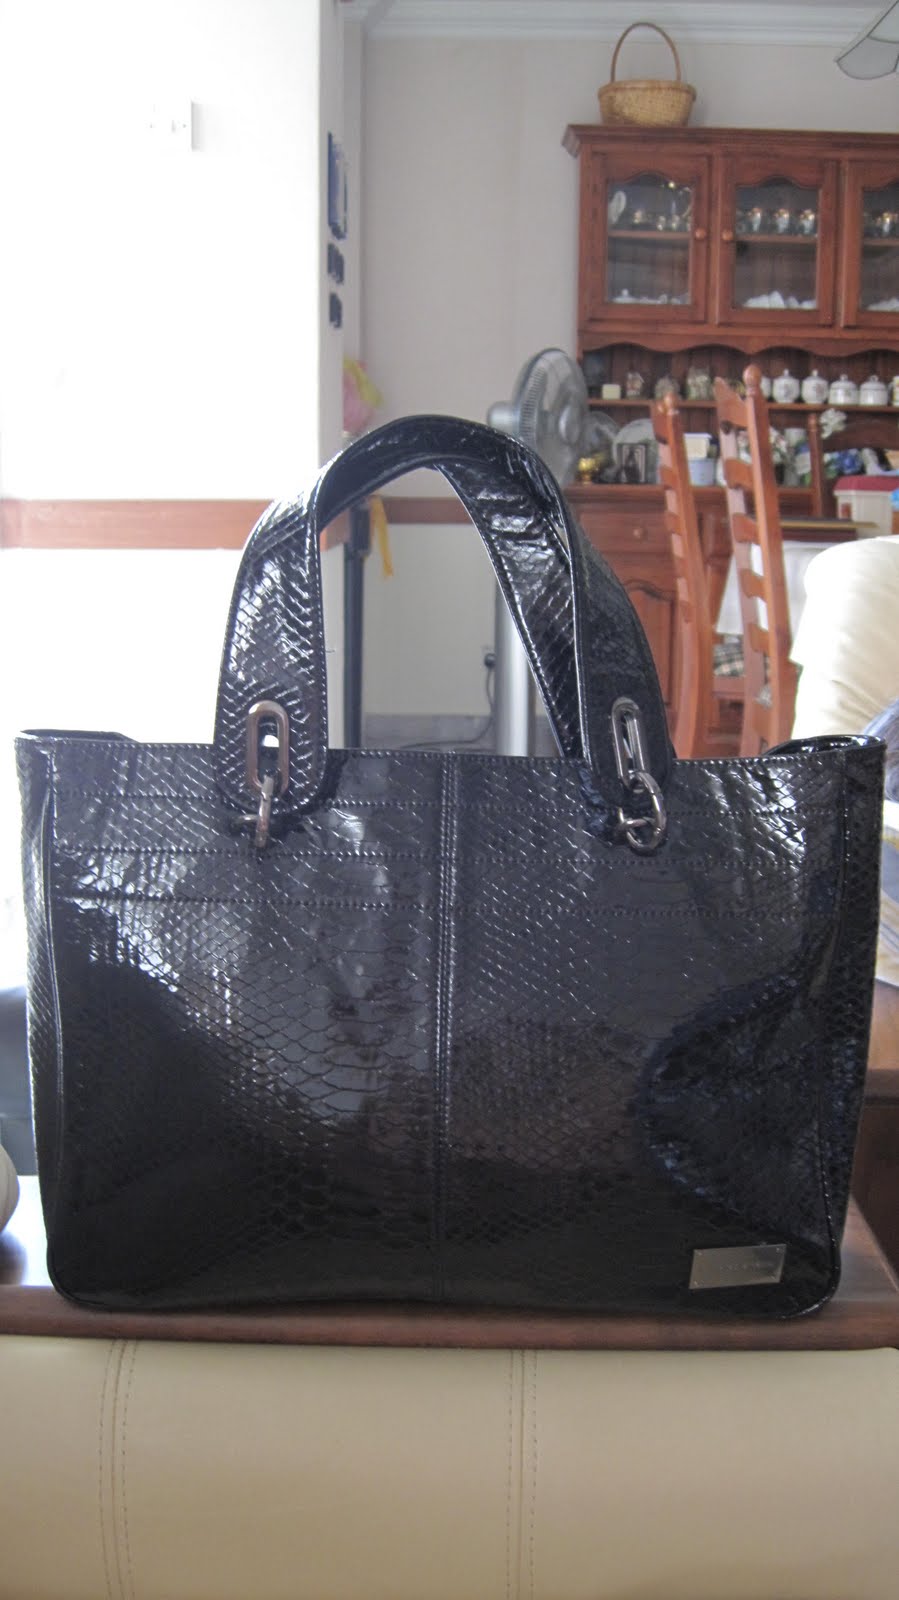 ♥ My Junks! ♥: 100% AUTHENTIC CHARLES AND KEITH TOTE BAG - [PRE-OWNED]